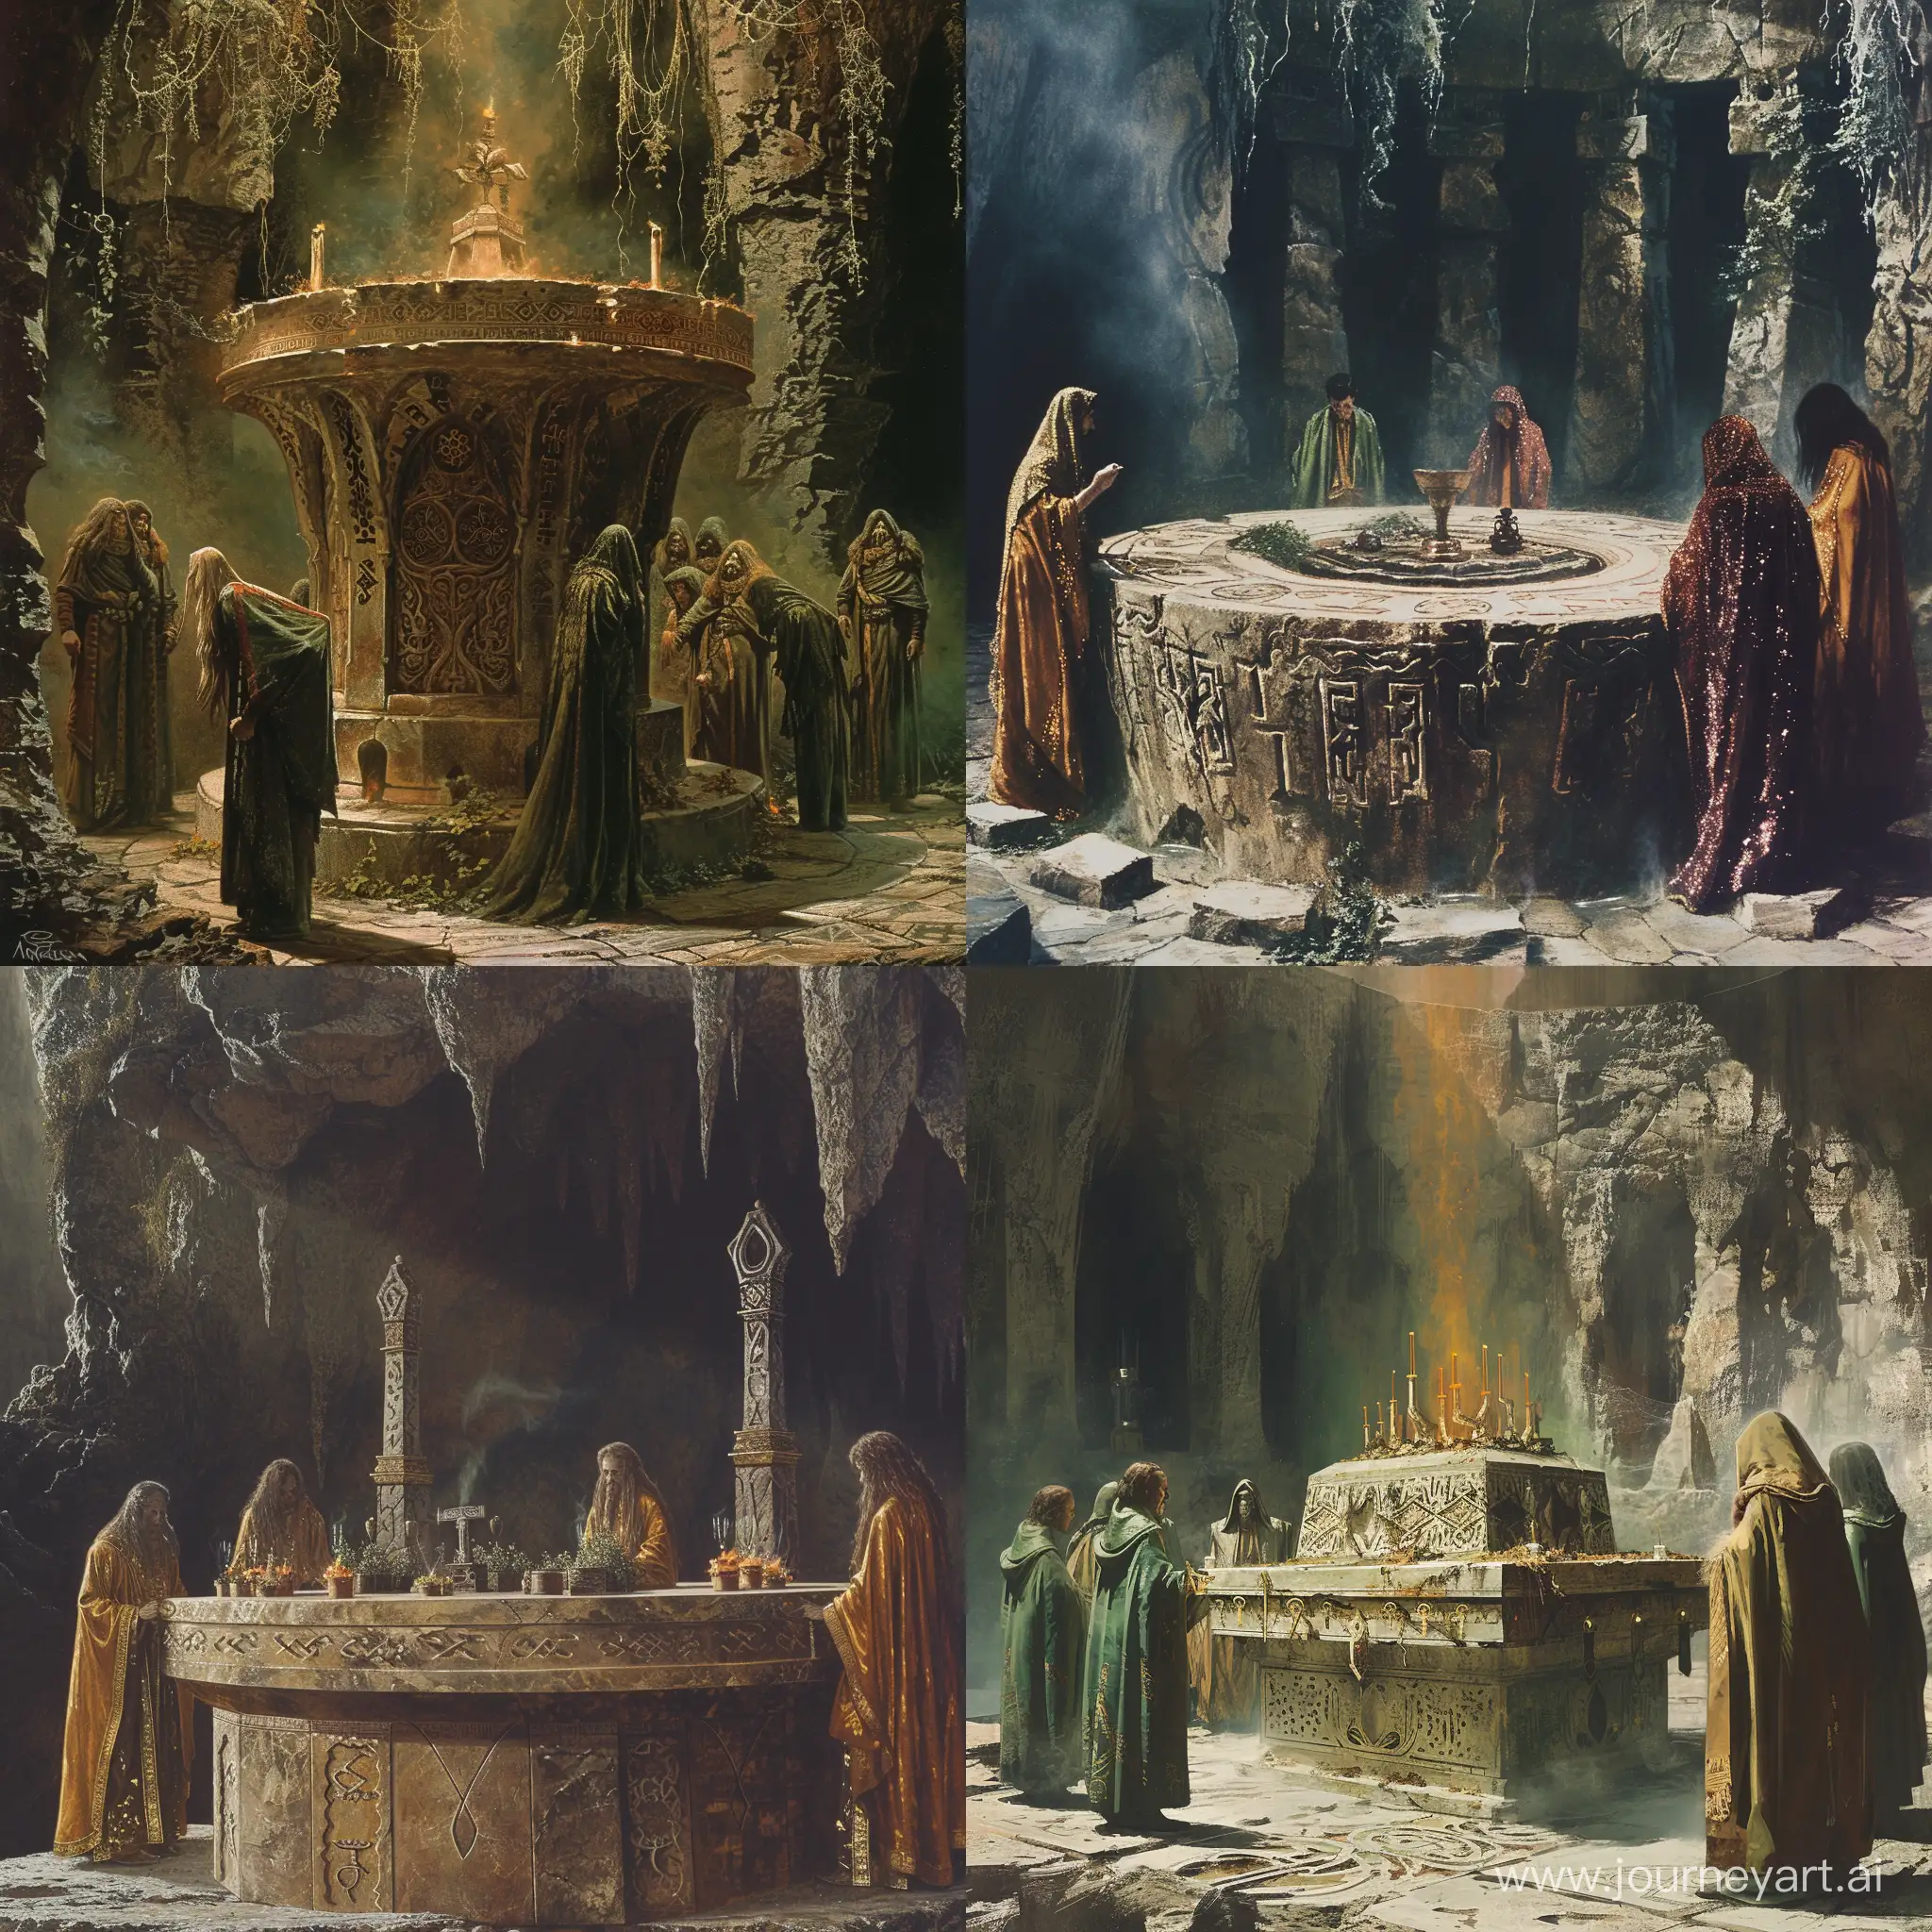 A Magical shrine, Carved from radiant marble adorned with intricate runes, Tended by devoted priests in shimmering robes, Humming with divine energy, surrounded by the fragrance of rare herbs, 1970's dark fantasy style, detailed, gritty, vintage